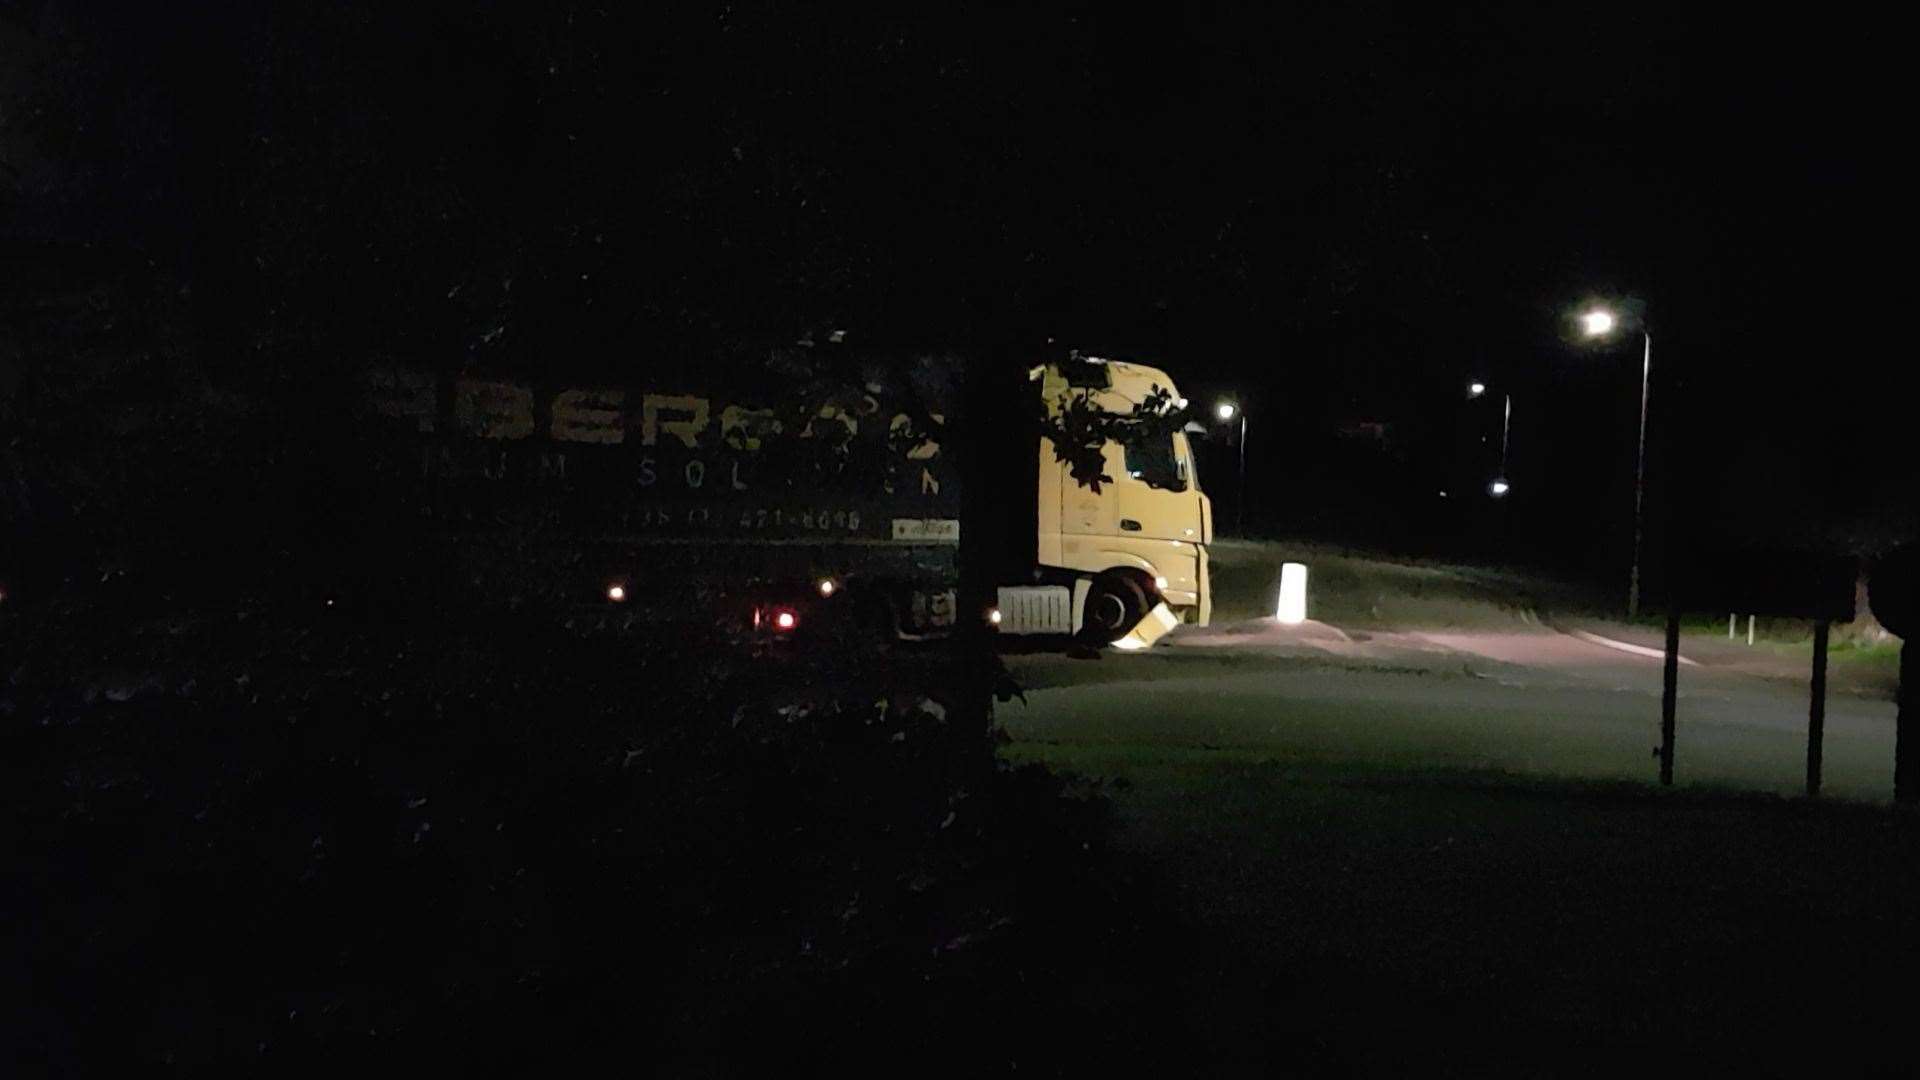 The Waberer's-branded lorry running over the illuminated bollard (20400317)